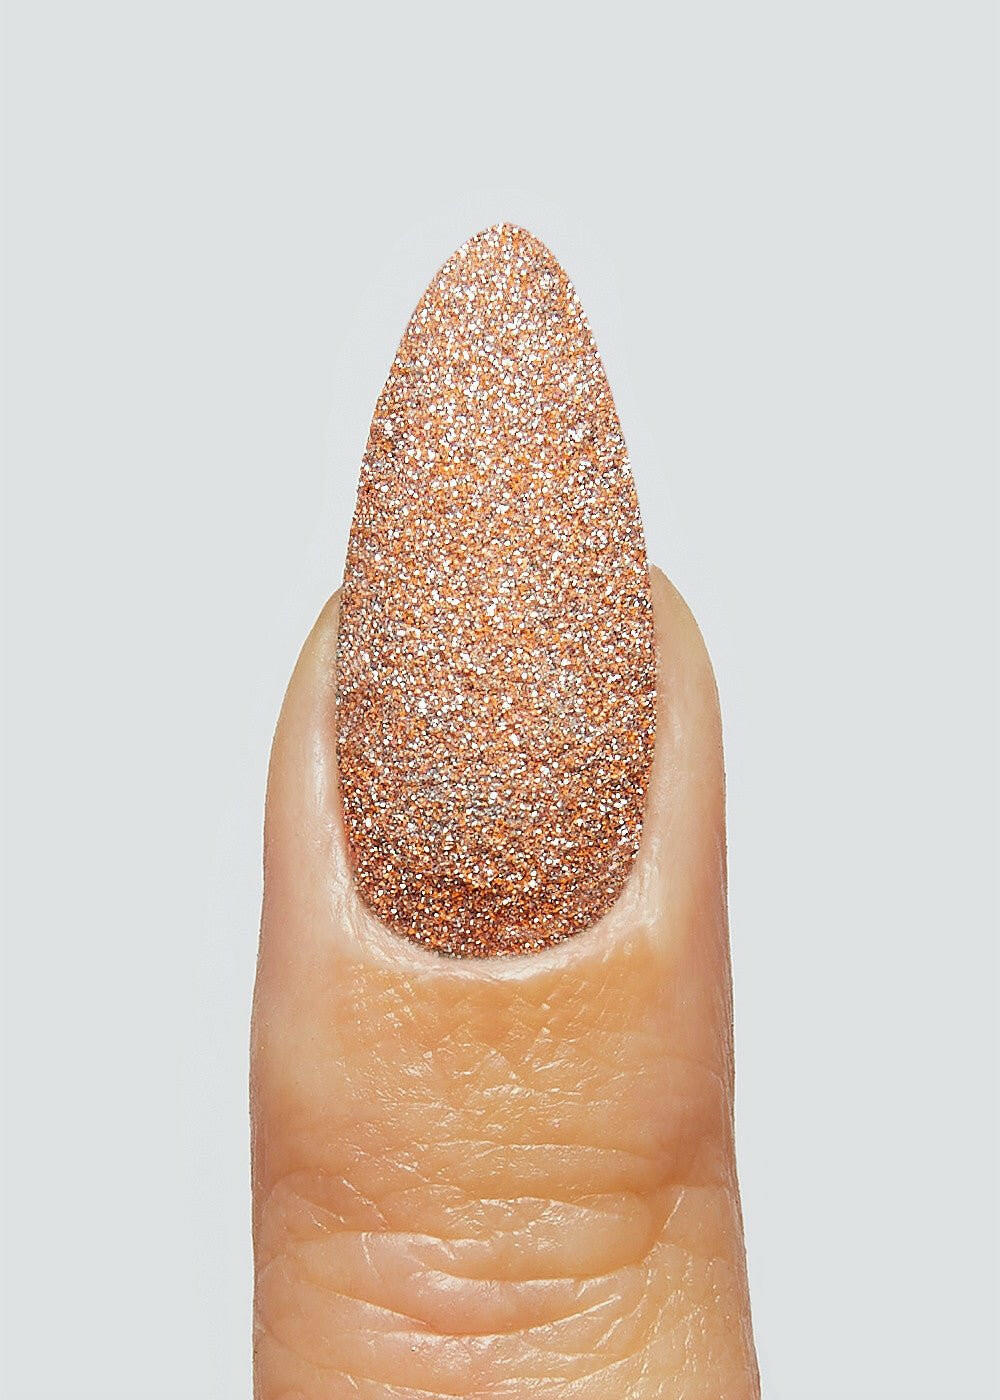 RUST FLASHING PIGMENT by the GELbottle - thePINKchair.ca - Nail Art - the GEL bottle